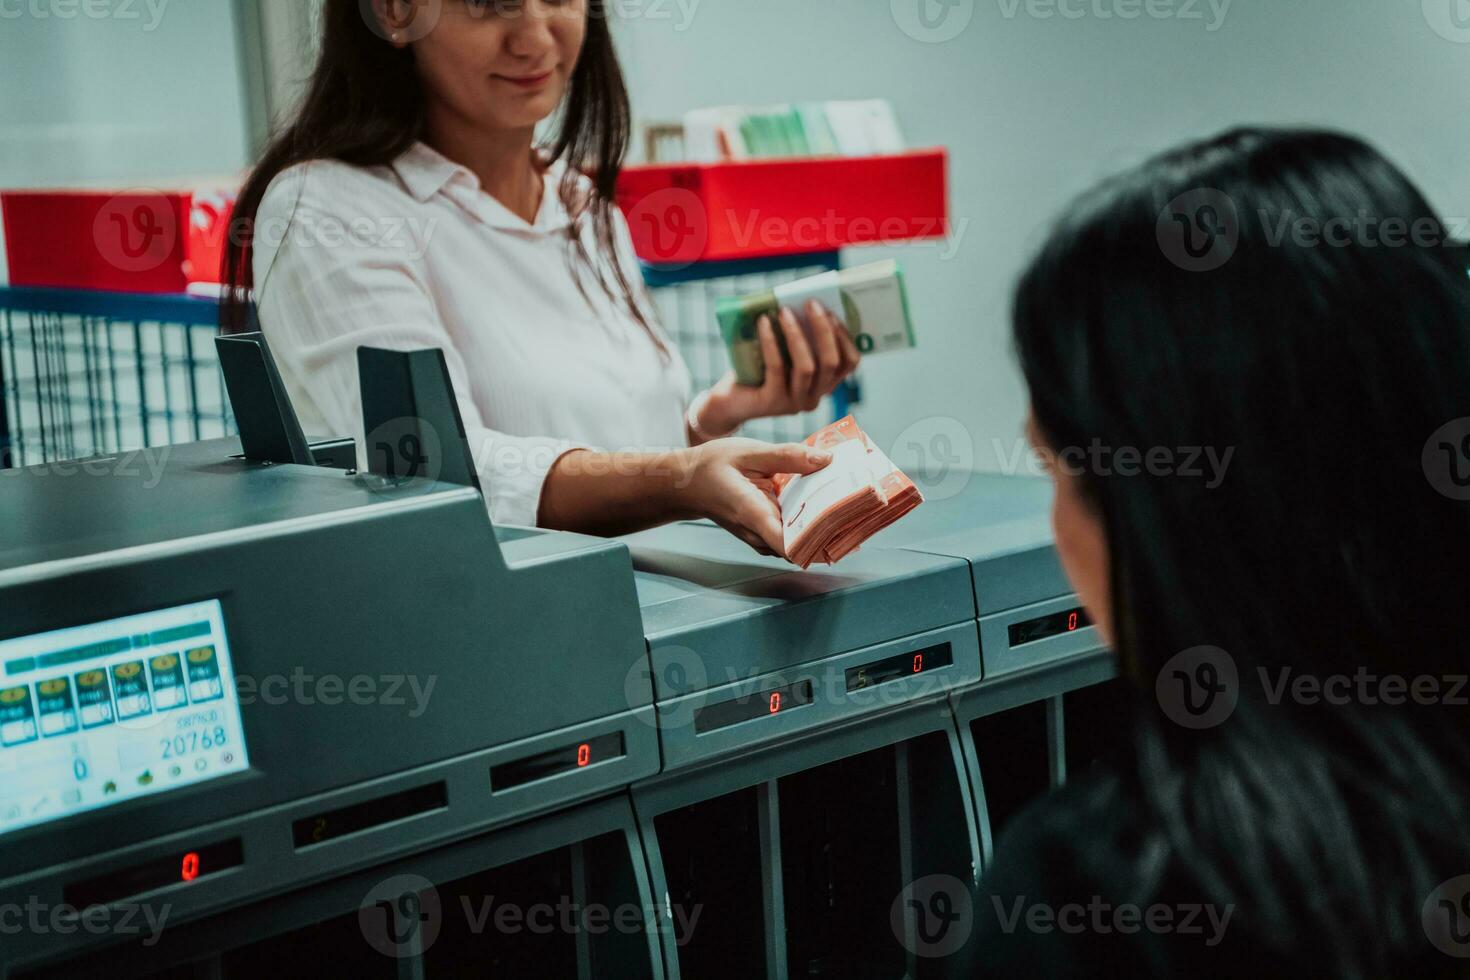 Bank employees using money counting machine while sorting and counting paper banknotes inside bank vault. Large amounts of money in the bank photo